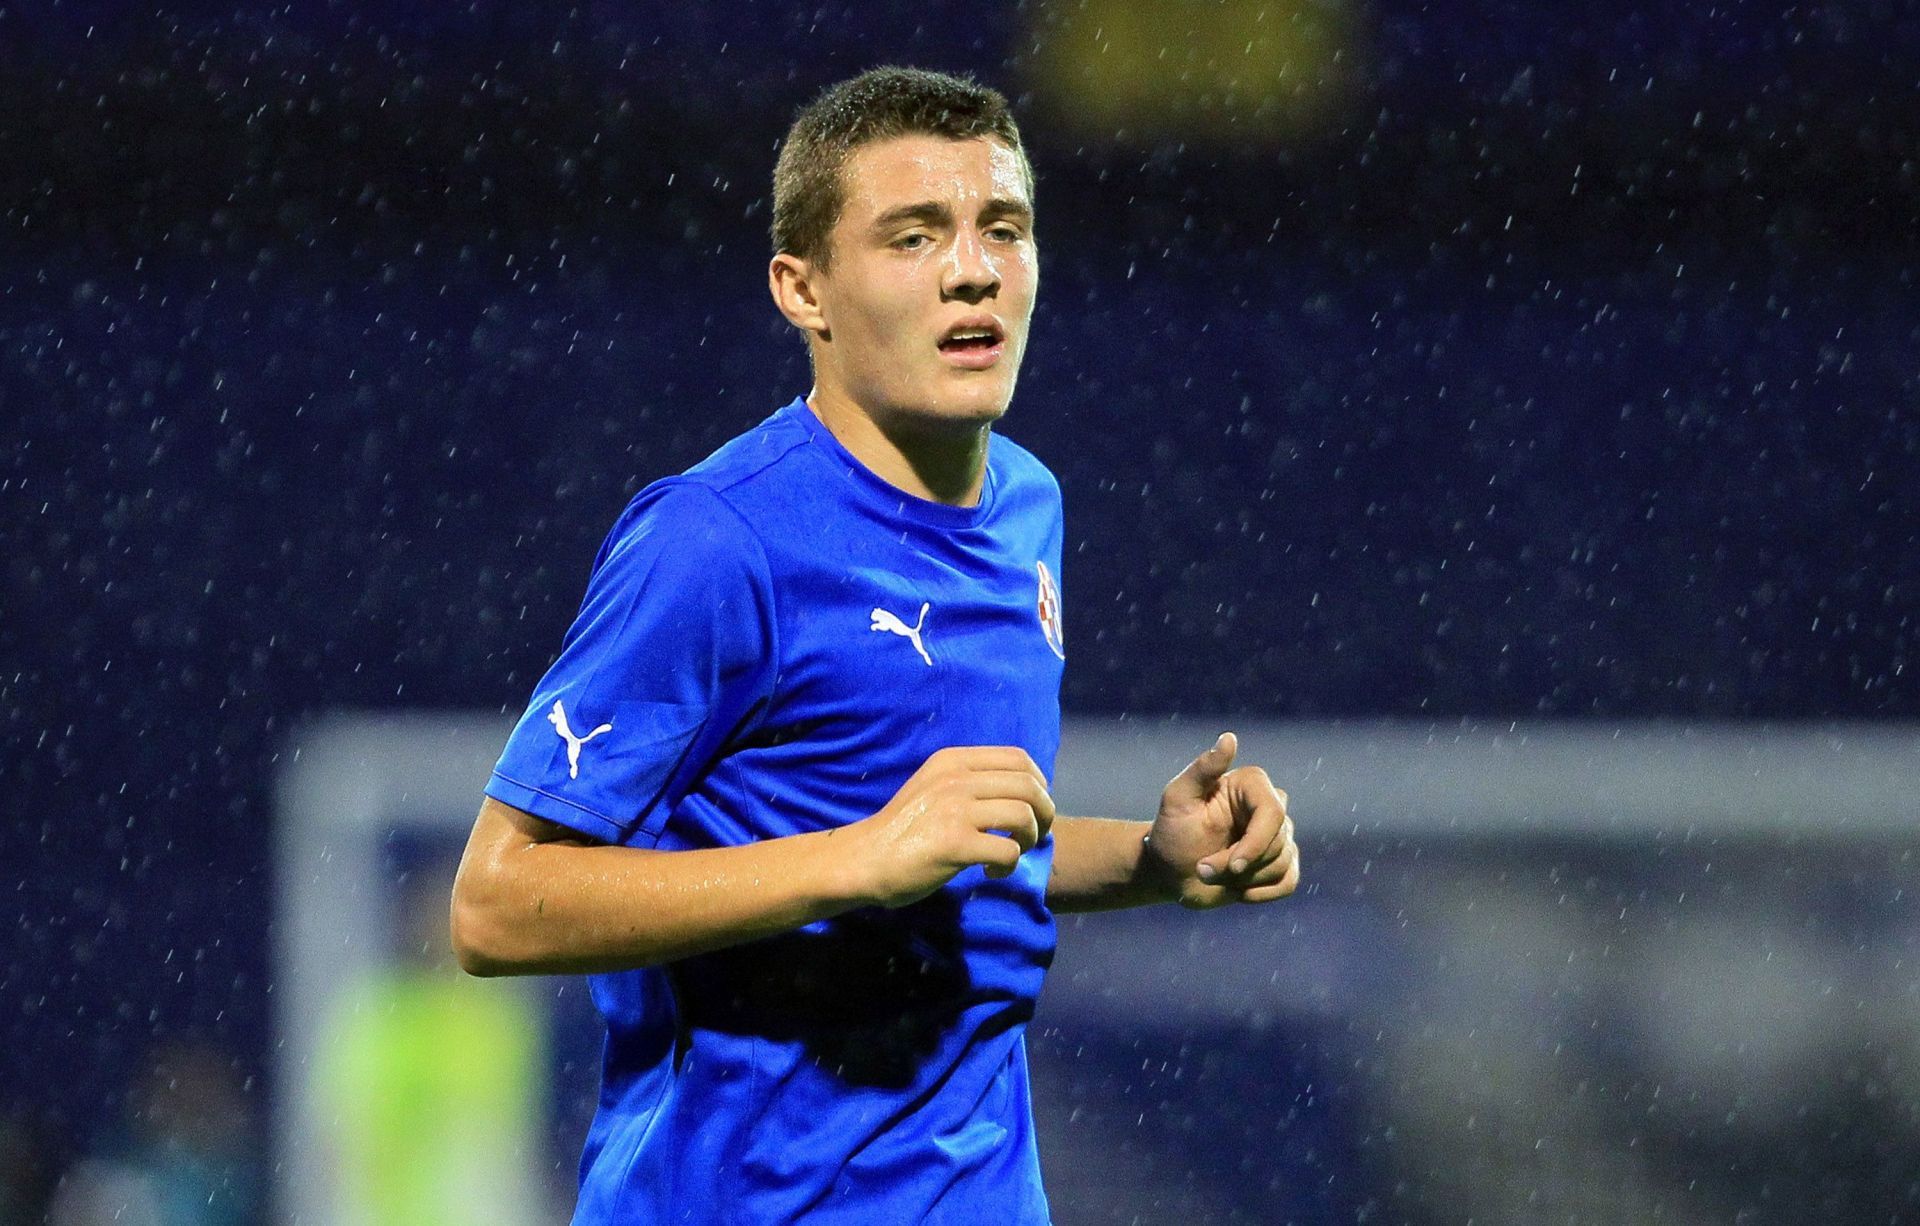 Mateo Kovacic was only 17 when he opened his account in the Champions League.